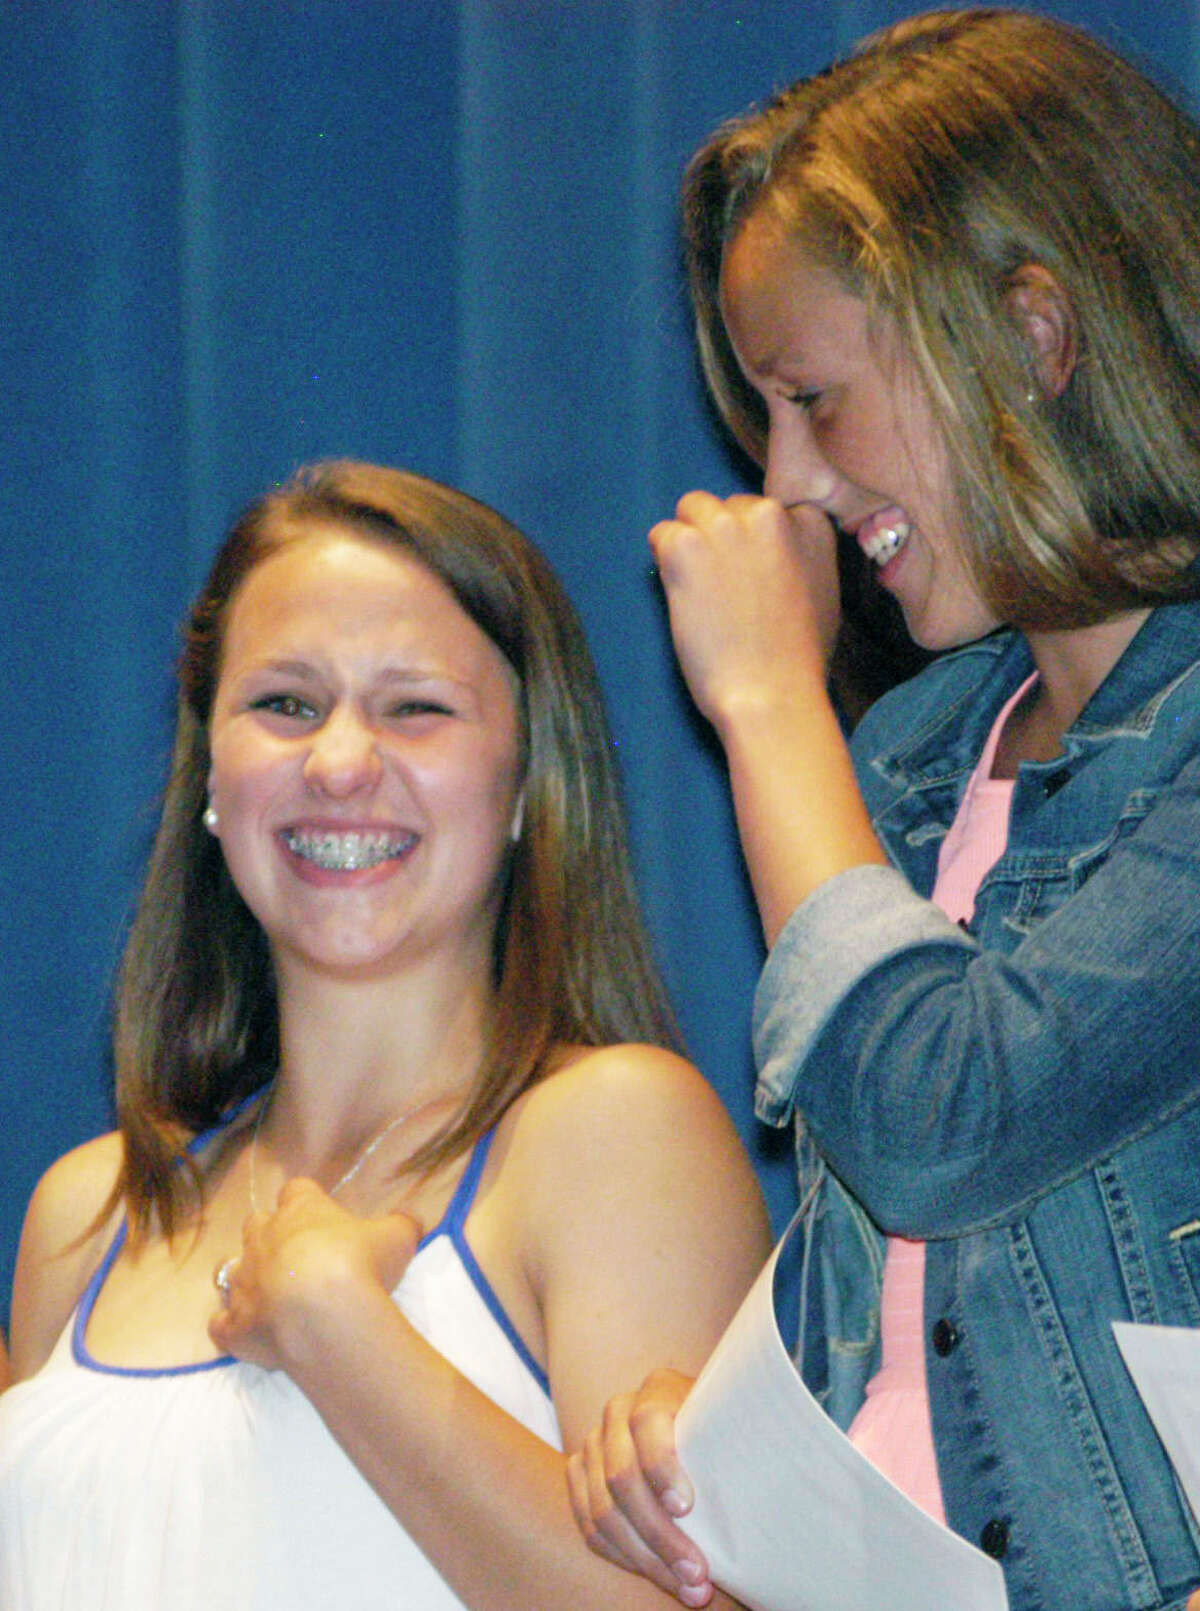 Good friends, asawell as soccer and basketball teammates, Samantha Moravsky, left, and Caroline Kelly share a light moment during Shepaug Valley High School's annual athletic awards ceremony, June 6, 2014 at the school in Washington.